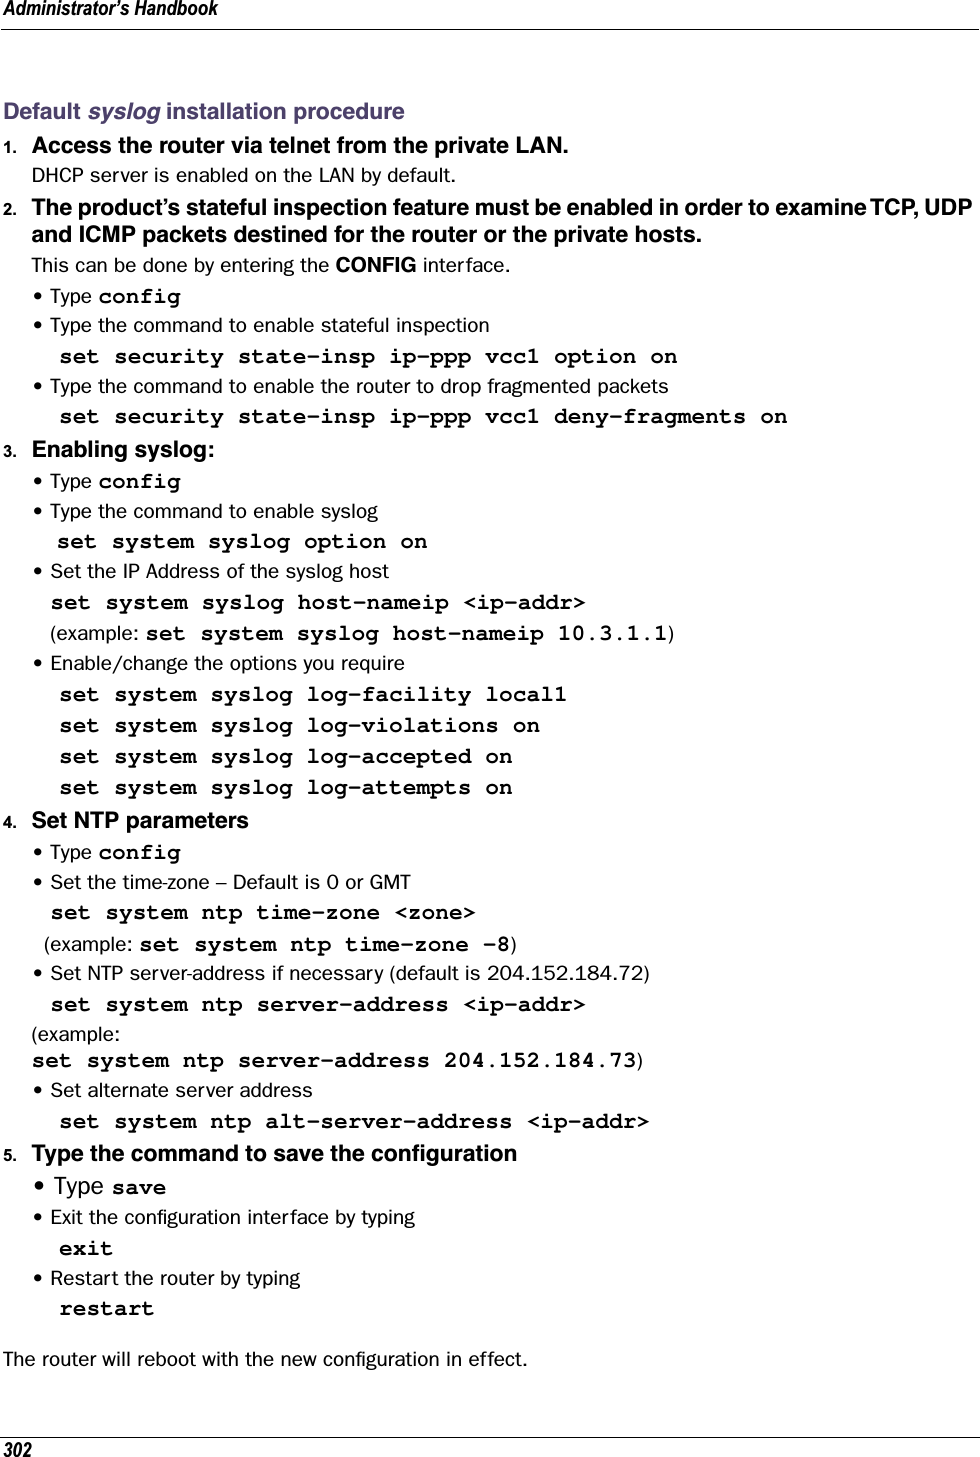 Administrator’s Handbook302Default syslog installation procedure1. Access the router via telnet from the private LAN.DHCP server is enabled on the LAN by default.2. The product’s stateful inspection feature must be enabled in order to examine TCP, UDP and ICMP packets destined for the router or the private hosts.This can be done by entering the CONFIG interface.• Type config• Type the command to enable stateful inspection  set security state-insp ip-ppp vcc1 option on• Type the command to enable the router to drop fragmented packets  set security state-insp ip-ppp vcc1 deny-fragments on3. Enabling syslog:• Type config• Type the command to enable syslog    set system syslog option on• Set the IP Address of the syslog host   set system syslog host-nameip &lt;ip-addr&gt;   (example: set system syslog host-nameip 10.3.1.1)• Enable/change the options you require  set system syslog log-facility local1  set system syslog log-violations on  set system syslog log-accepted on  set system syslog log-attempts on4. Set NTP parameters• Type config• Set the time-zone – Default is 0 or GMT   set system ntp time-zone &lt;zone&gt;  (example: set system ntp time-zone –8)• Set NTP server-address if necessary (default is 204.152.184.72)   set system ntp server-address &lt;ip-addr&gt;(example: set system ntp server-address 204.152.184.73)• Set alternate server address  set system ntp alt-server-address &lt;ip-addr&gt;5. Type the command to save the conﬁguration• Type save• Exit the conﬁguration interface by typing  exit• Restart the router by typing  restartThe router will reboot with the new conﬁguration in effect.